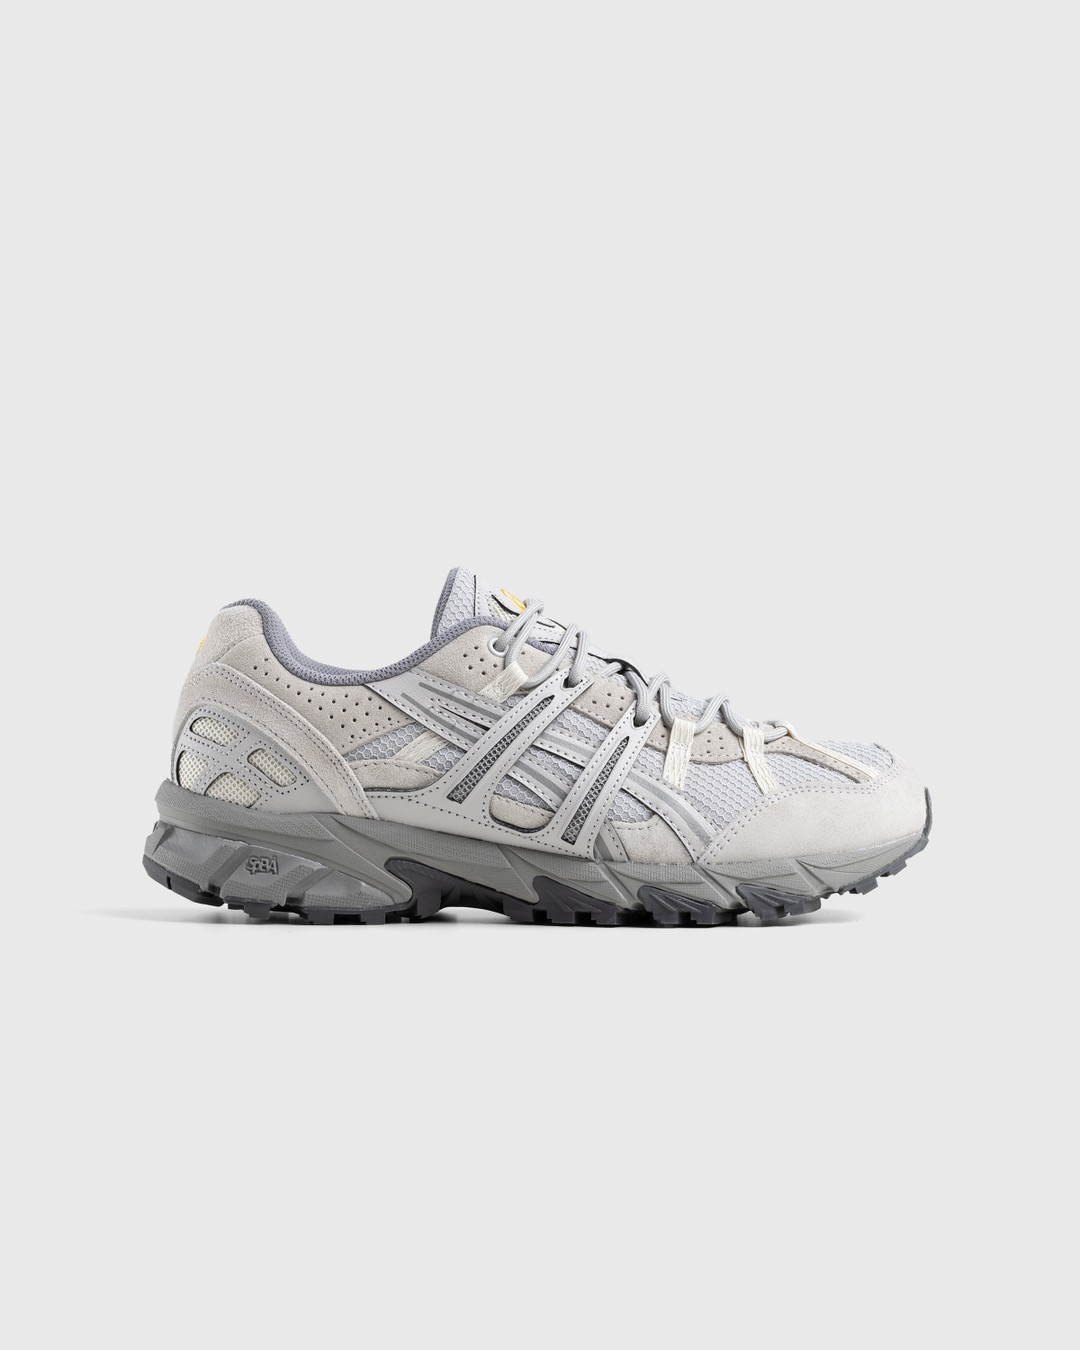 asics – Gel-Sonoma 15-50 Oyster Grey/Clay Grey - Sneakers - Grey - Image 1